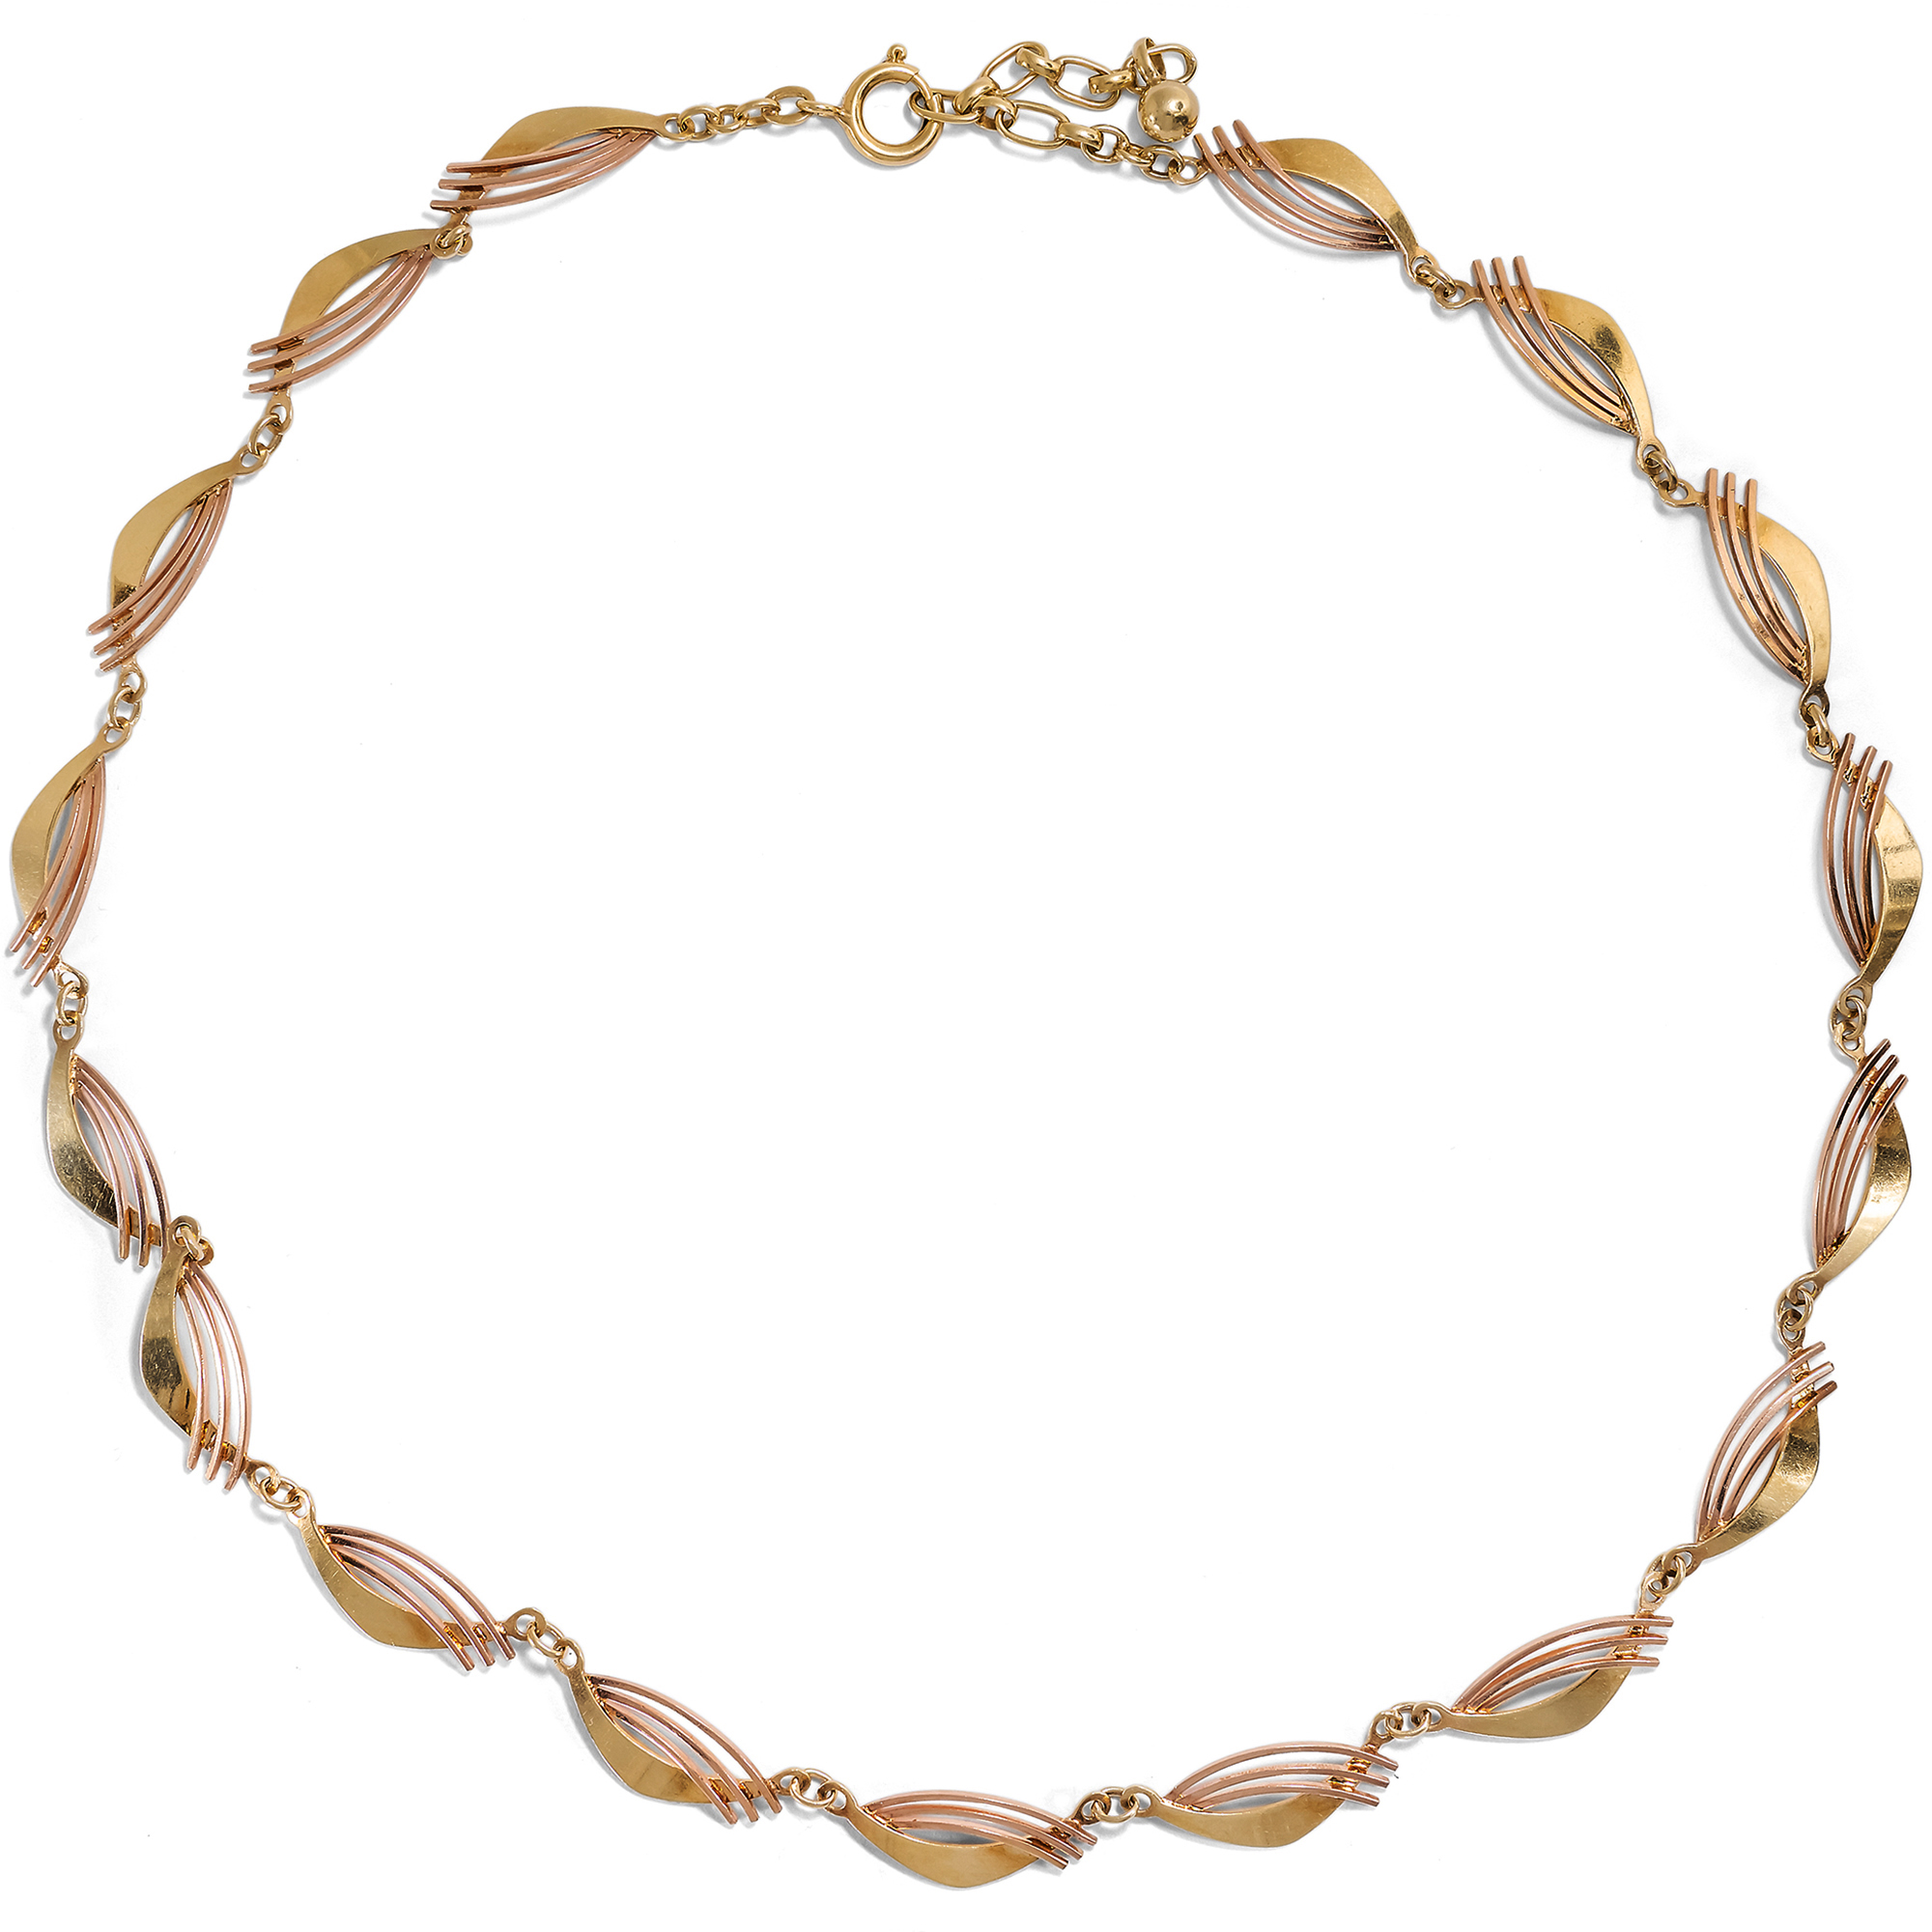 Vintage Necklace in Two-Coloured Gold by Andreas Daub, Germany c. 1955